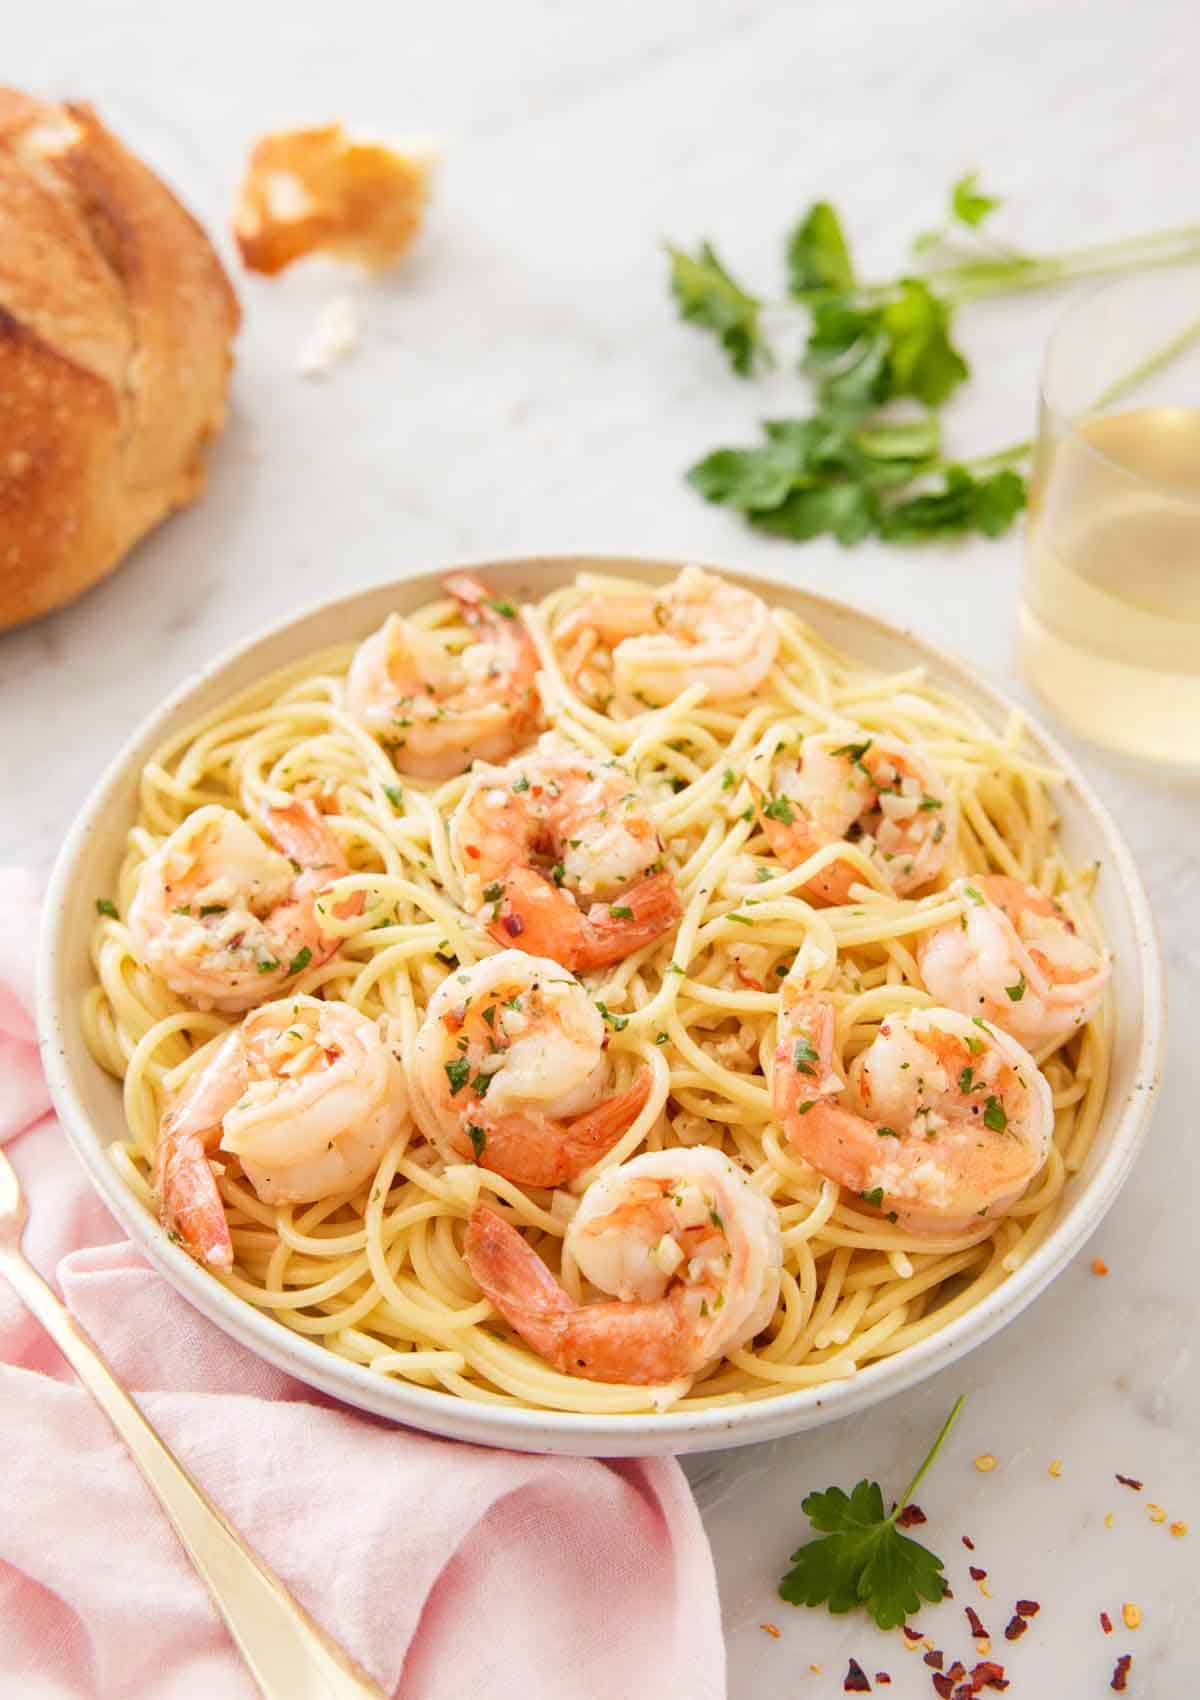 A bowl of pasta noodles topped with shrimp scampi.